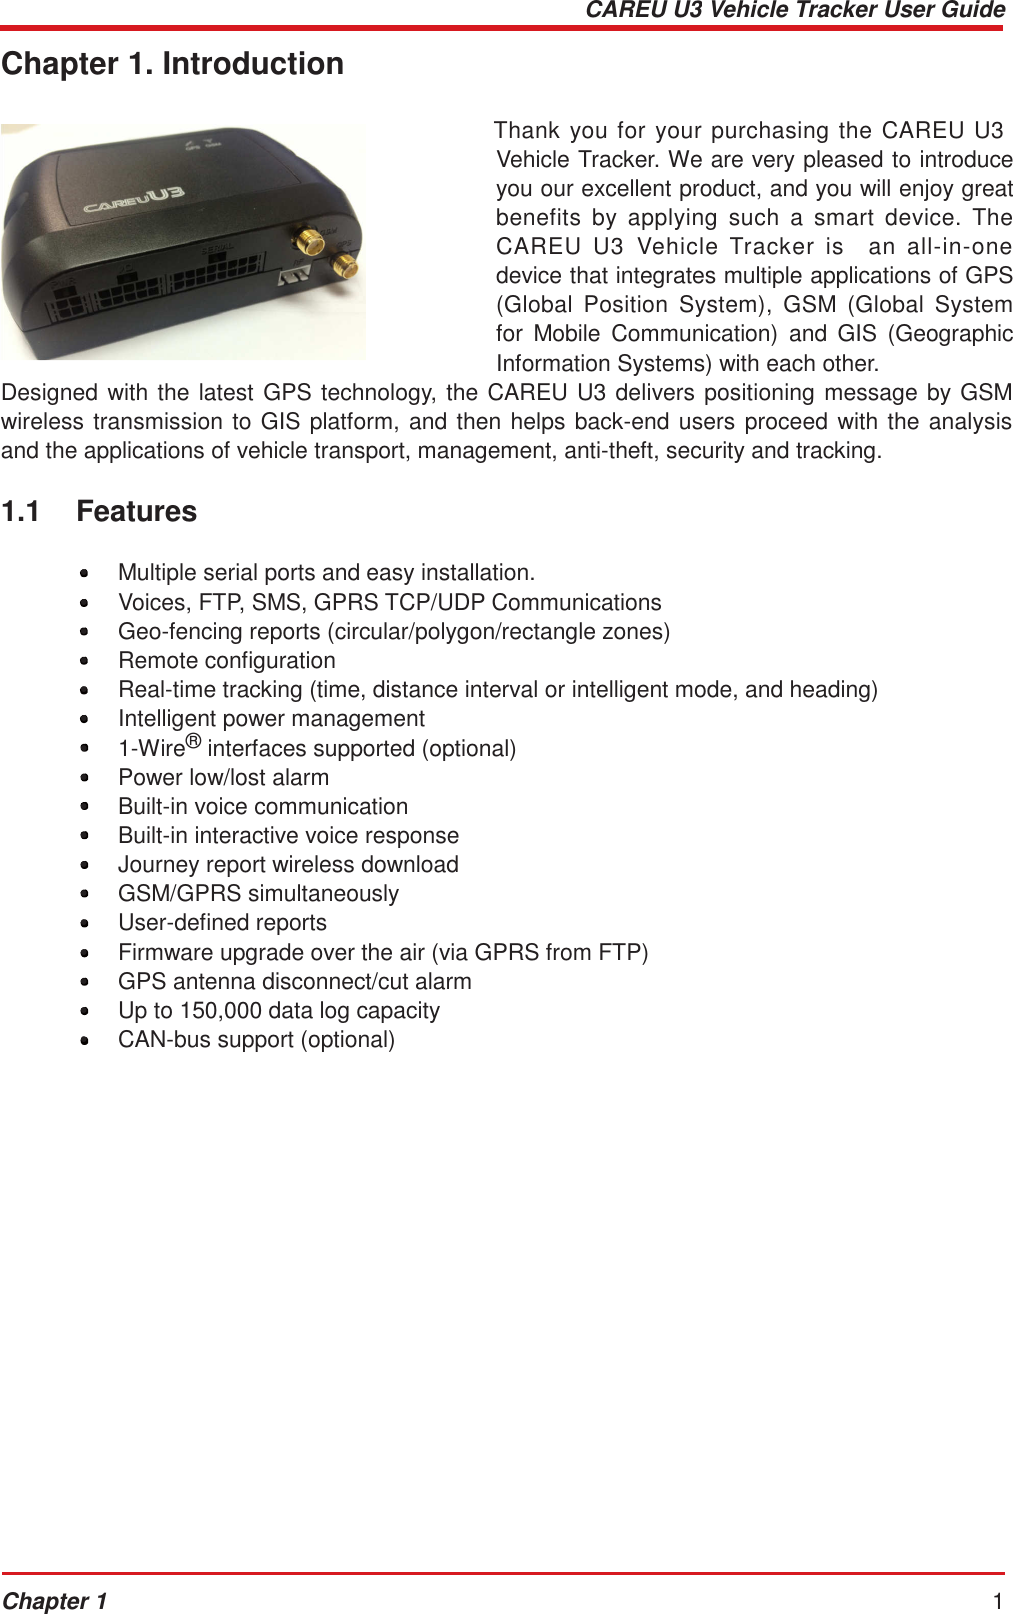 CAREU U3 Vehicle Tracker User Guide Chapter 1 1     Chapter 1. Introduction   Thank you  for  your purchasing the  CAREU U3 Vehicle Tracker. We are very pleased to introduce you our excellent product, and you will enjoy great benefits  by  applying  such  a  smart  device.  The CAREU  U3  Vehicle  Tracker  is    an  all-in-one device that integrates multiple applications of GPS (Global  Position  System),  GSM  (Global  System for  Mobile  Communication)  and  GIS  (Geographic Information Systems) with each other. Designed with the latest GPS technology, the CAREU U3 delivers positioning message by GSM wireless transmission to GIS platform, and then helps back-end users proceed with the analysis and the applications of vehicle transport, management, anti-theft, security and tracking.  1.1    Features  •  Multiple serial ports and easy installation. •  Voices, FTP, SMS, GPRS TCP/UDP Communications •  Geo-fencing reports (circular/polygon/rectangle zones) •  Remote configuration •  Real-time tracking (time, distance interval or intelligent mode, and heading) •  Intelligent power management •  1-Wire® interfaces supported (optional) •  Power low/lost alarm •  Built-in voice communication •  Built-in interactive voice response •  Journey report wireless download •  GSM/GPRS simultaneously •  User-defined reports •  Firmware upgrade over the air (via GPRS from FTP) •  GPS antenna disconnect/cut alarm •  Up to 150,000 data log capacity •  CAN-bus support (optional) 